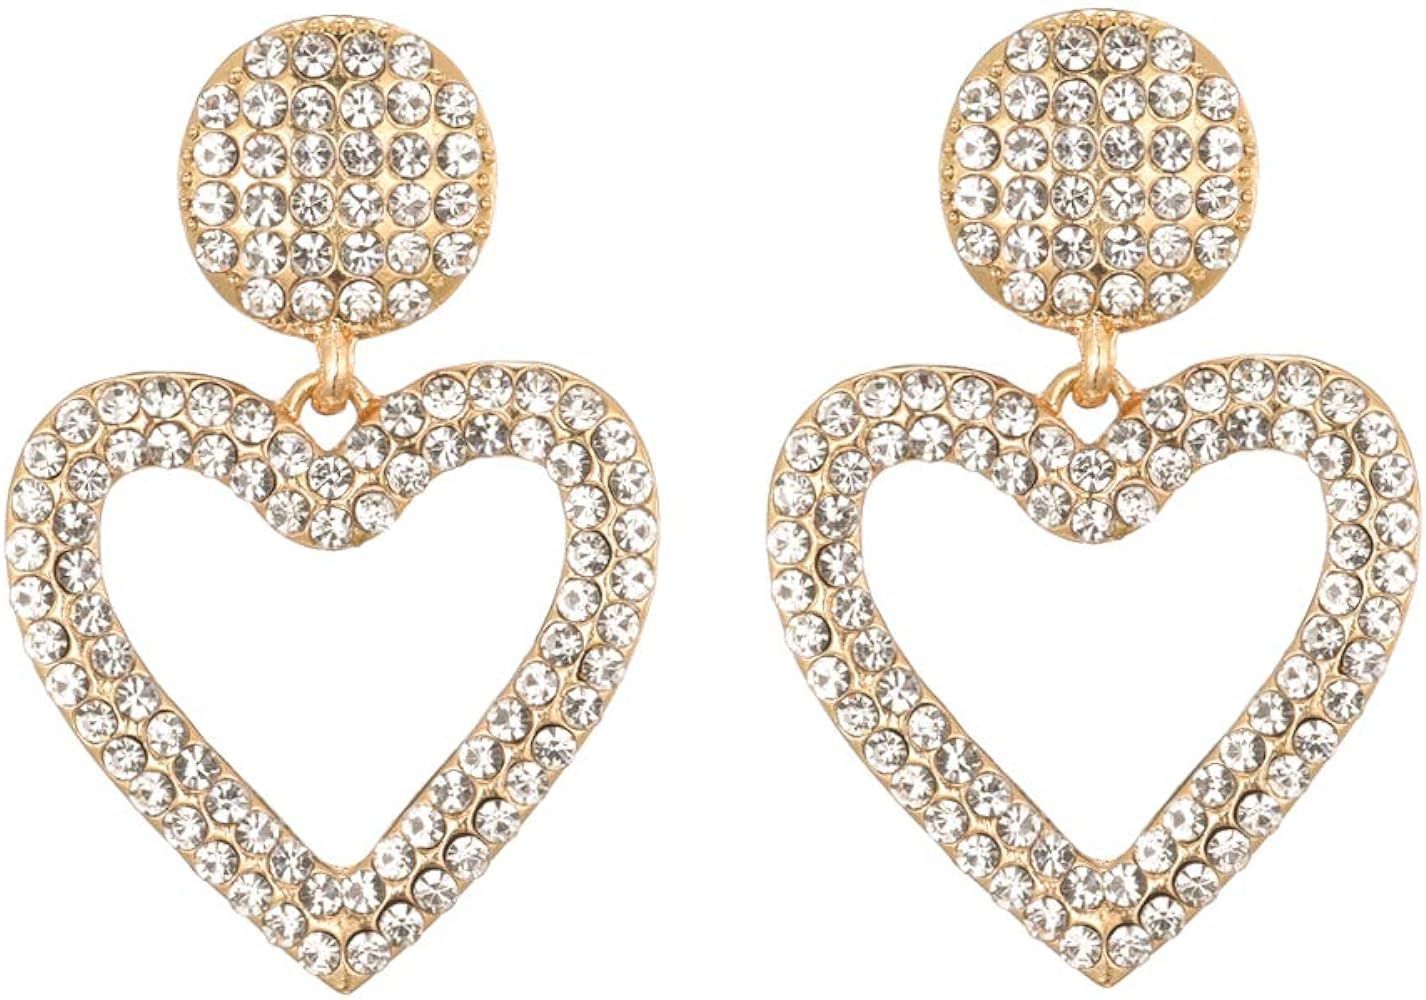 Crystal Heart Sweeties Drop Earrings for The Love Women Valentine Gifts KELMALL COLLECTION | Amazon (US)